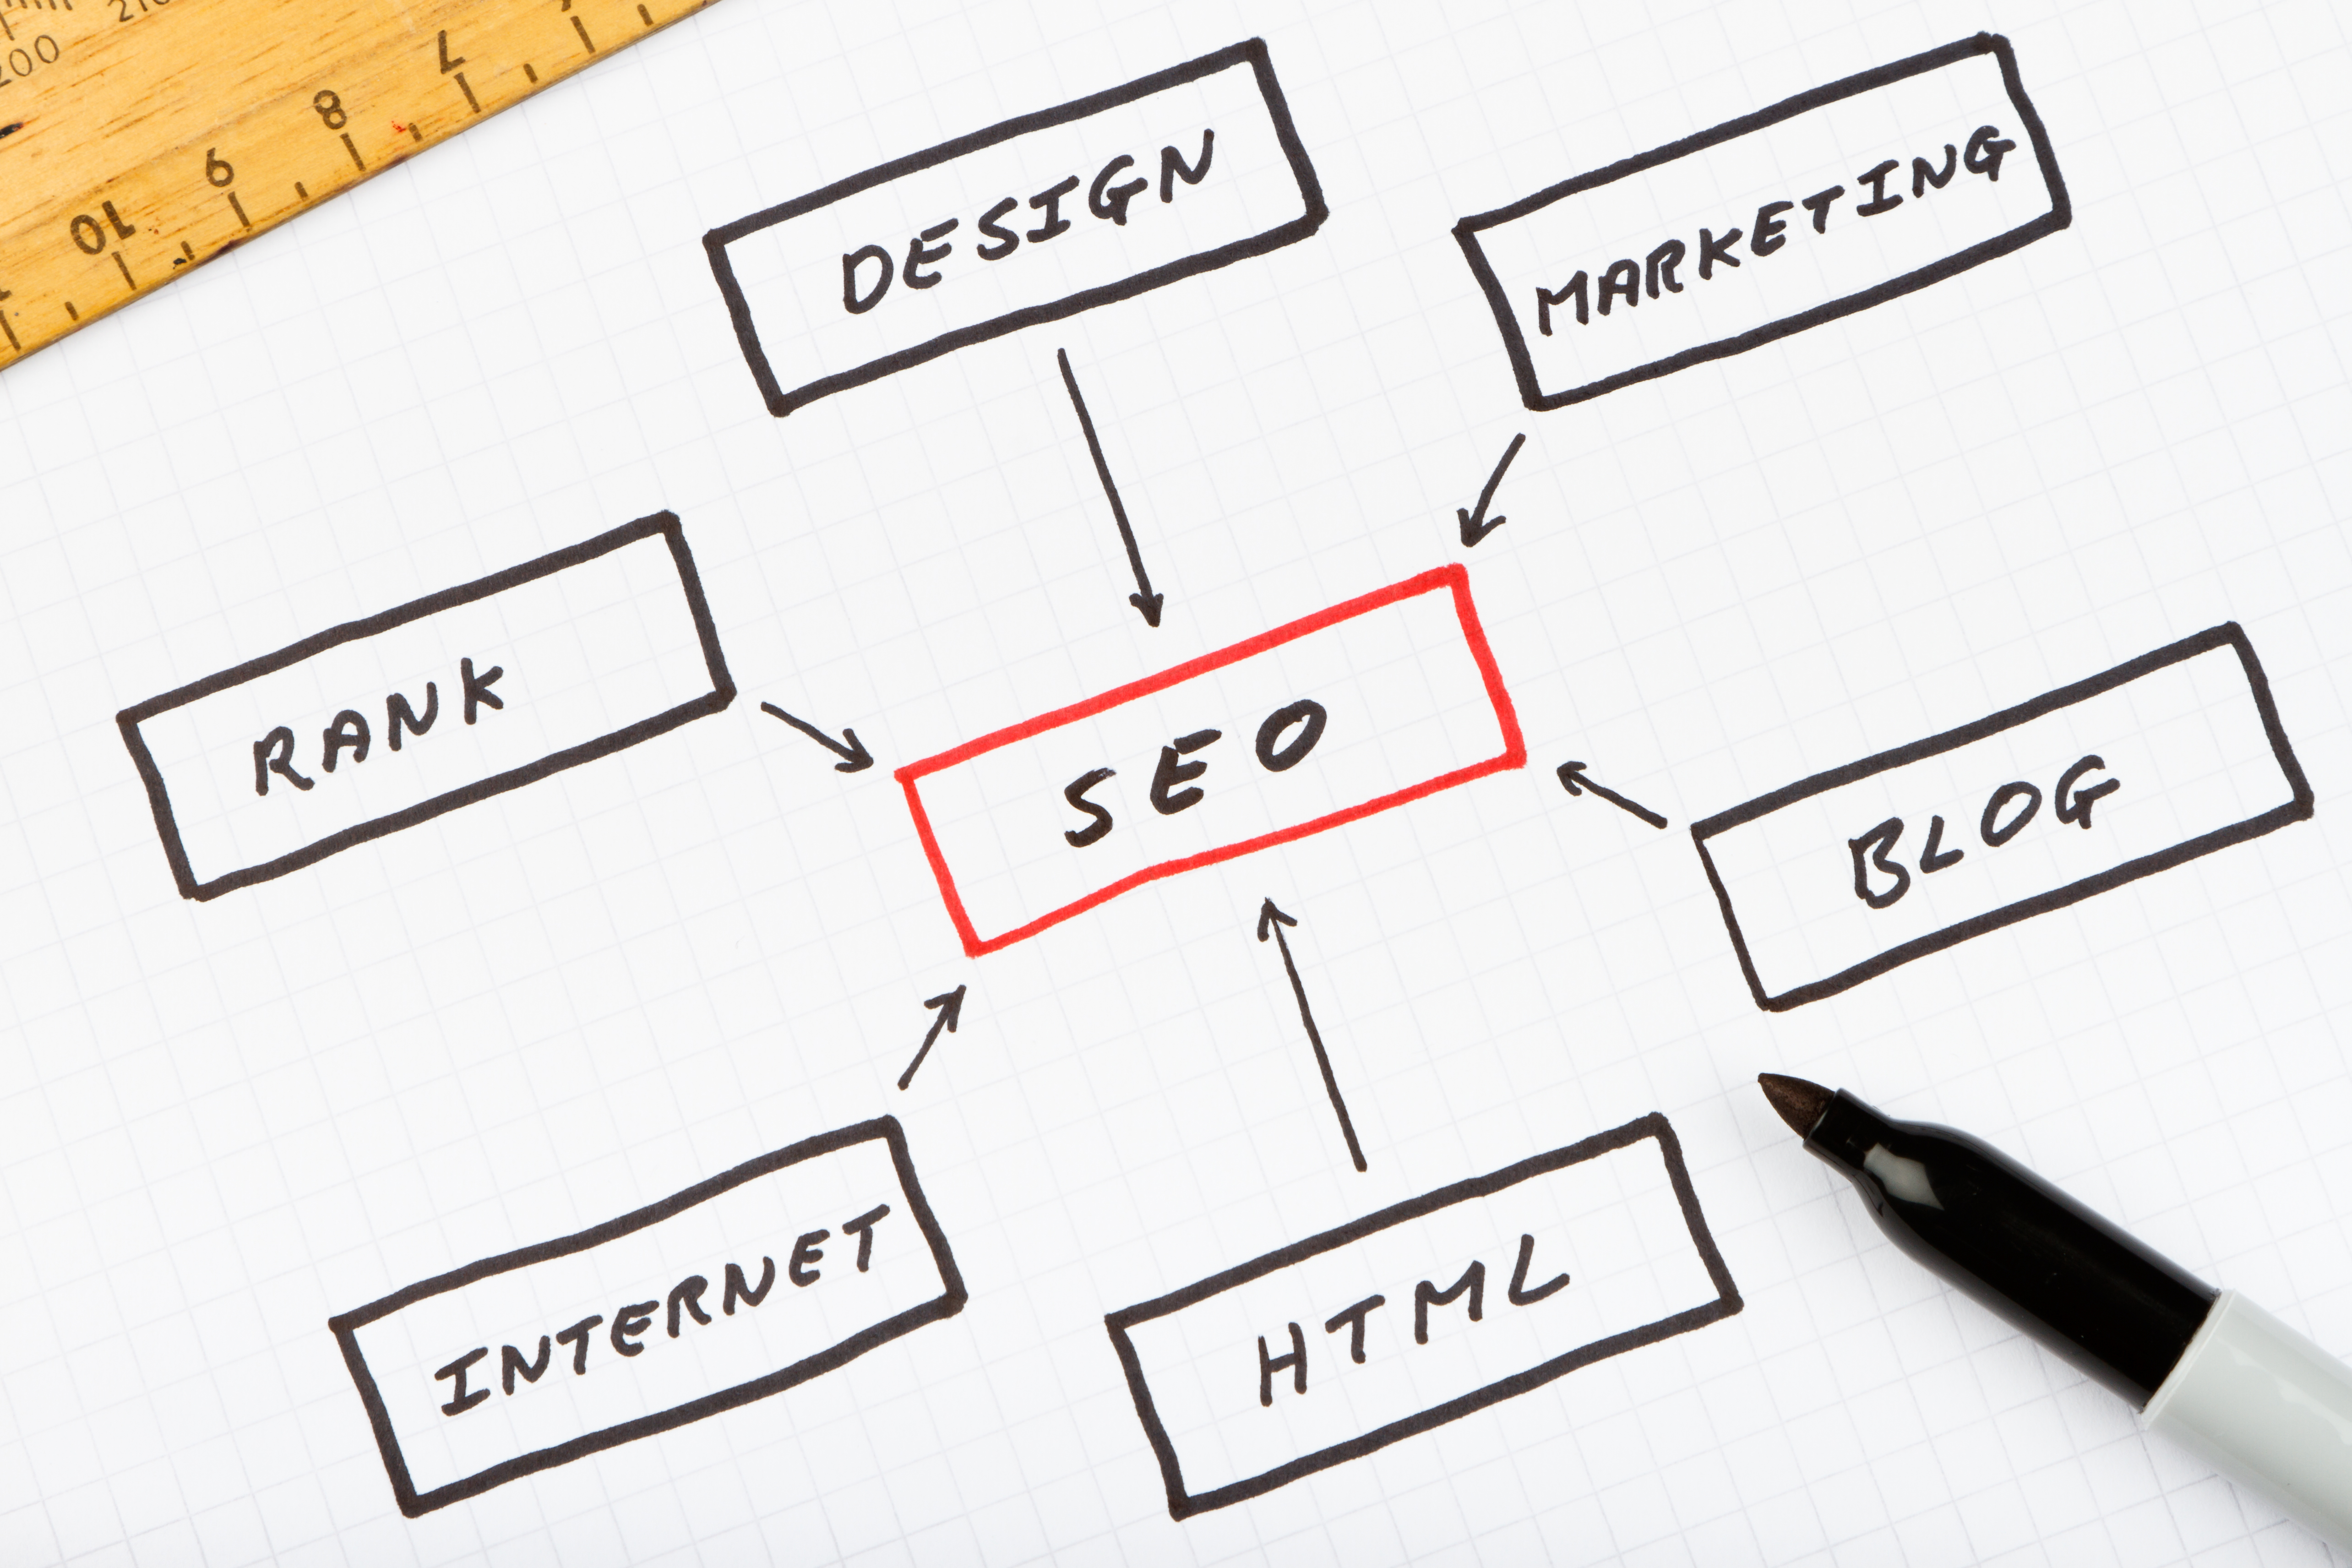 seo tips guide to search engine optimization seo in box with other boxes pointing to it that say rank design marketing blog html and internet ACS Web Design & SEO Syracuse NY